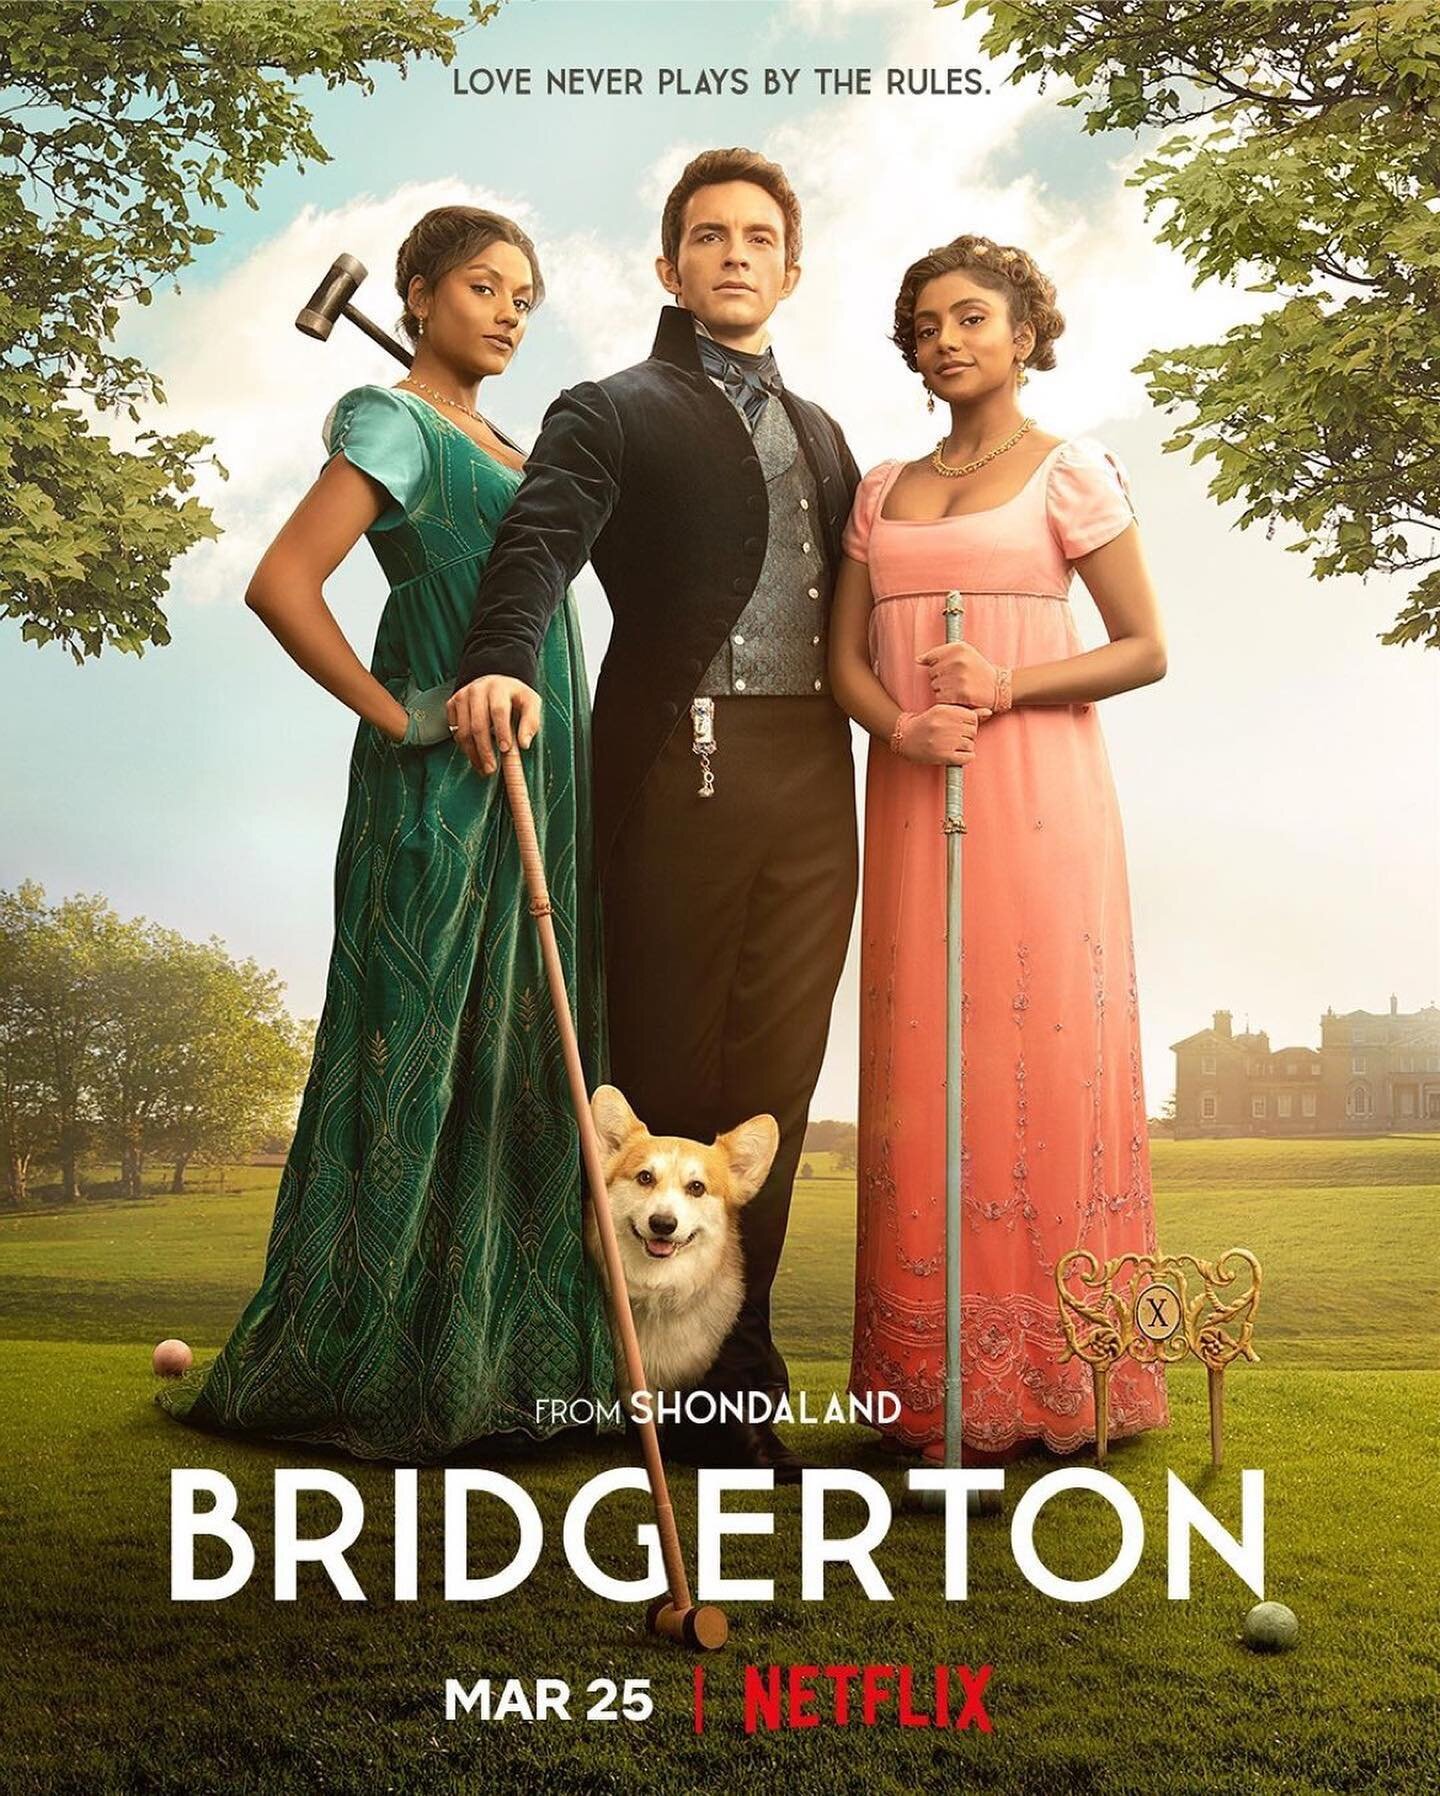 Dearest Bridgerton fans,
Now that the second season is on Netflix, there is something or rather things that one must understand about romance series. Because every romance novel MUST have a happy ending, when there is a series, each book focuses on a